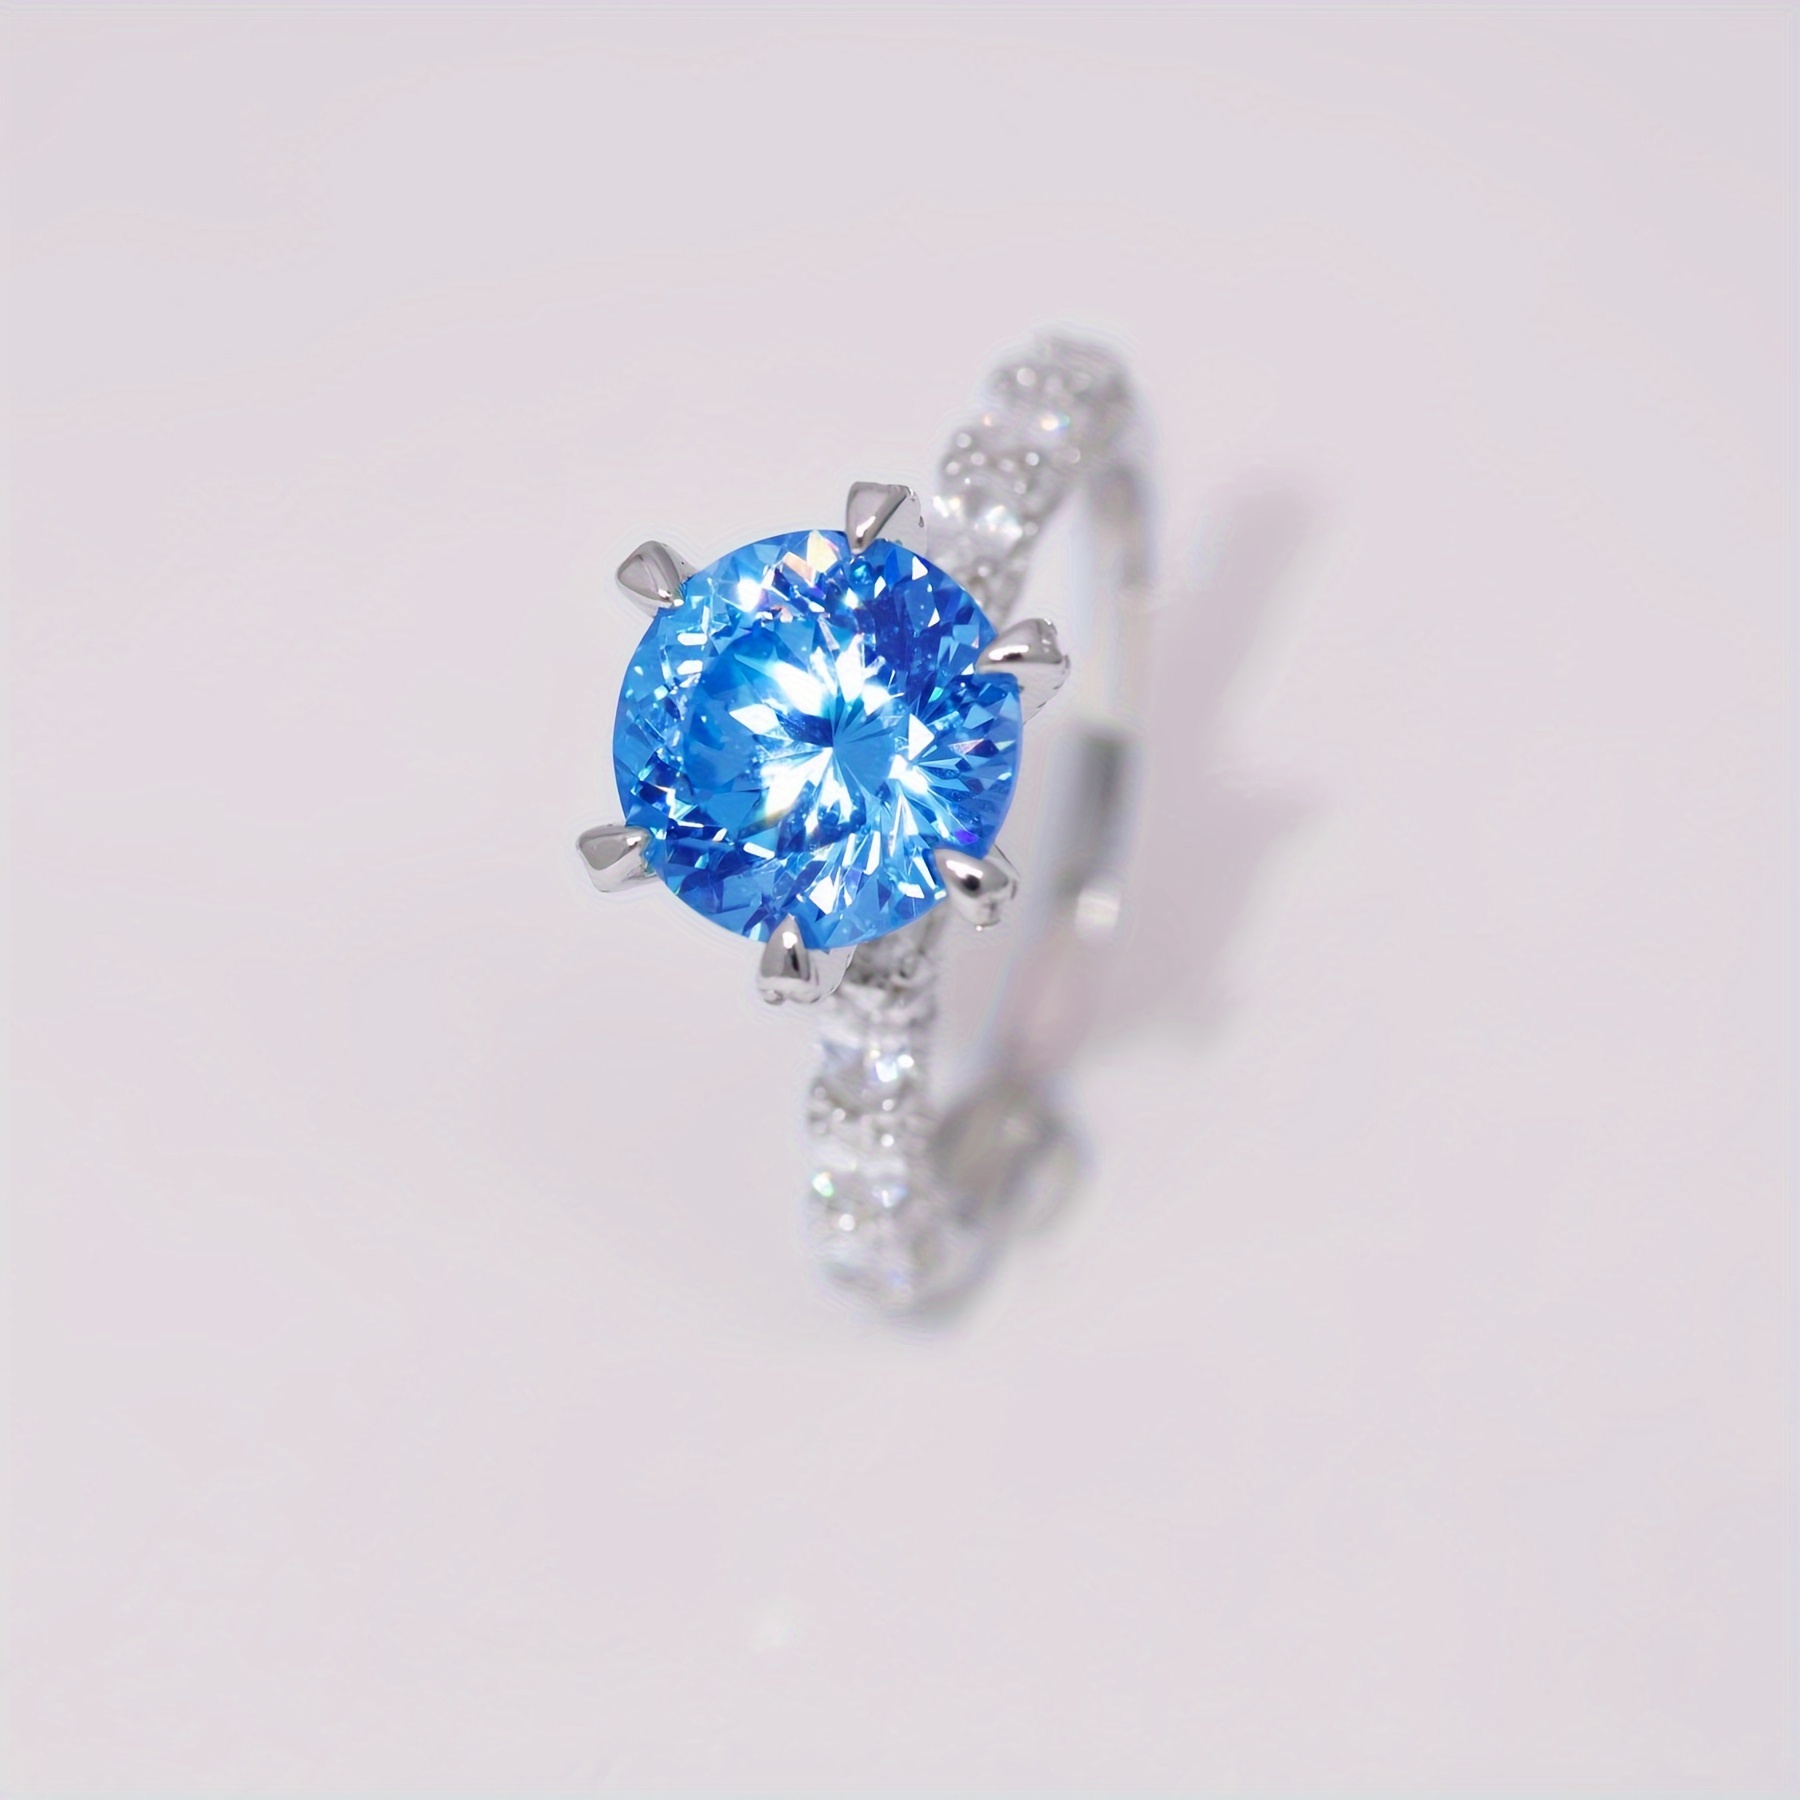 

1pc 3.0 Carat Blue Moissanite 925 Silver Ring, Anniversary Gifts